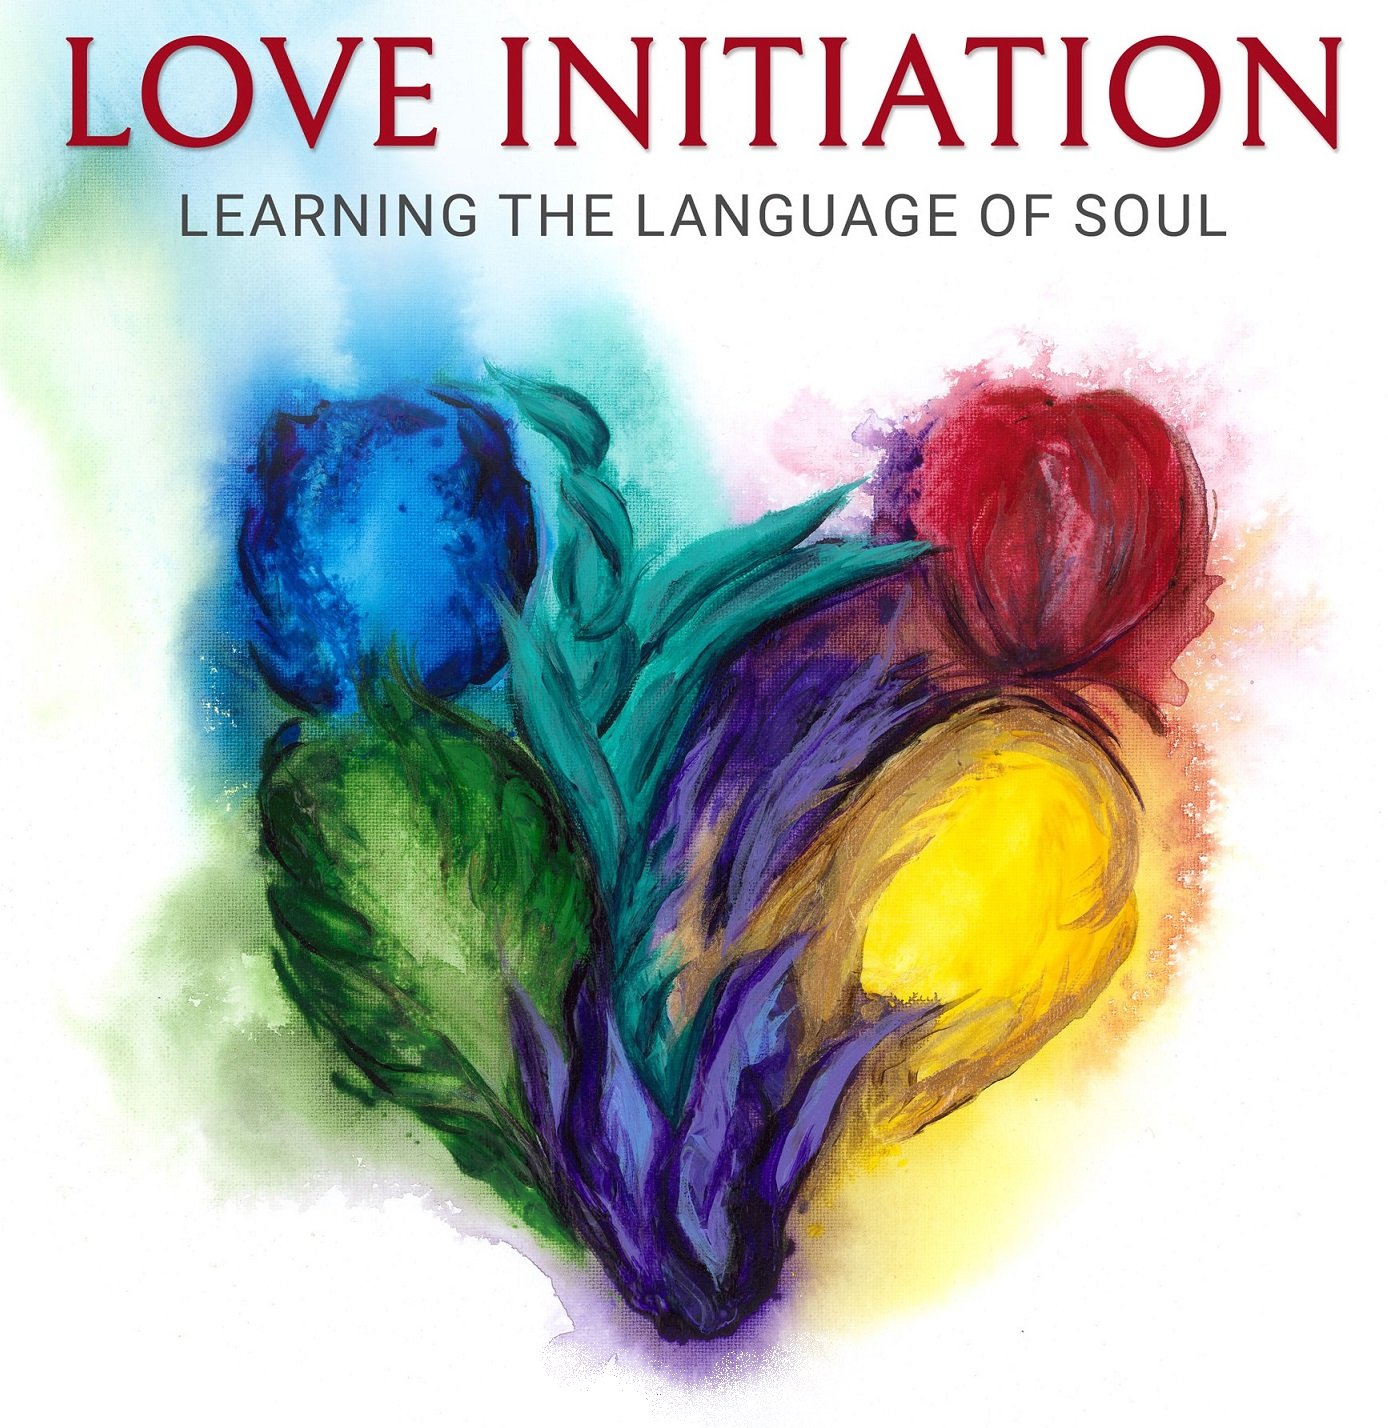 Love-Initiation-short2-Front book cover.jpg